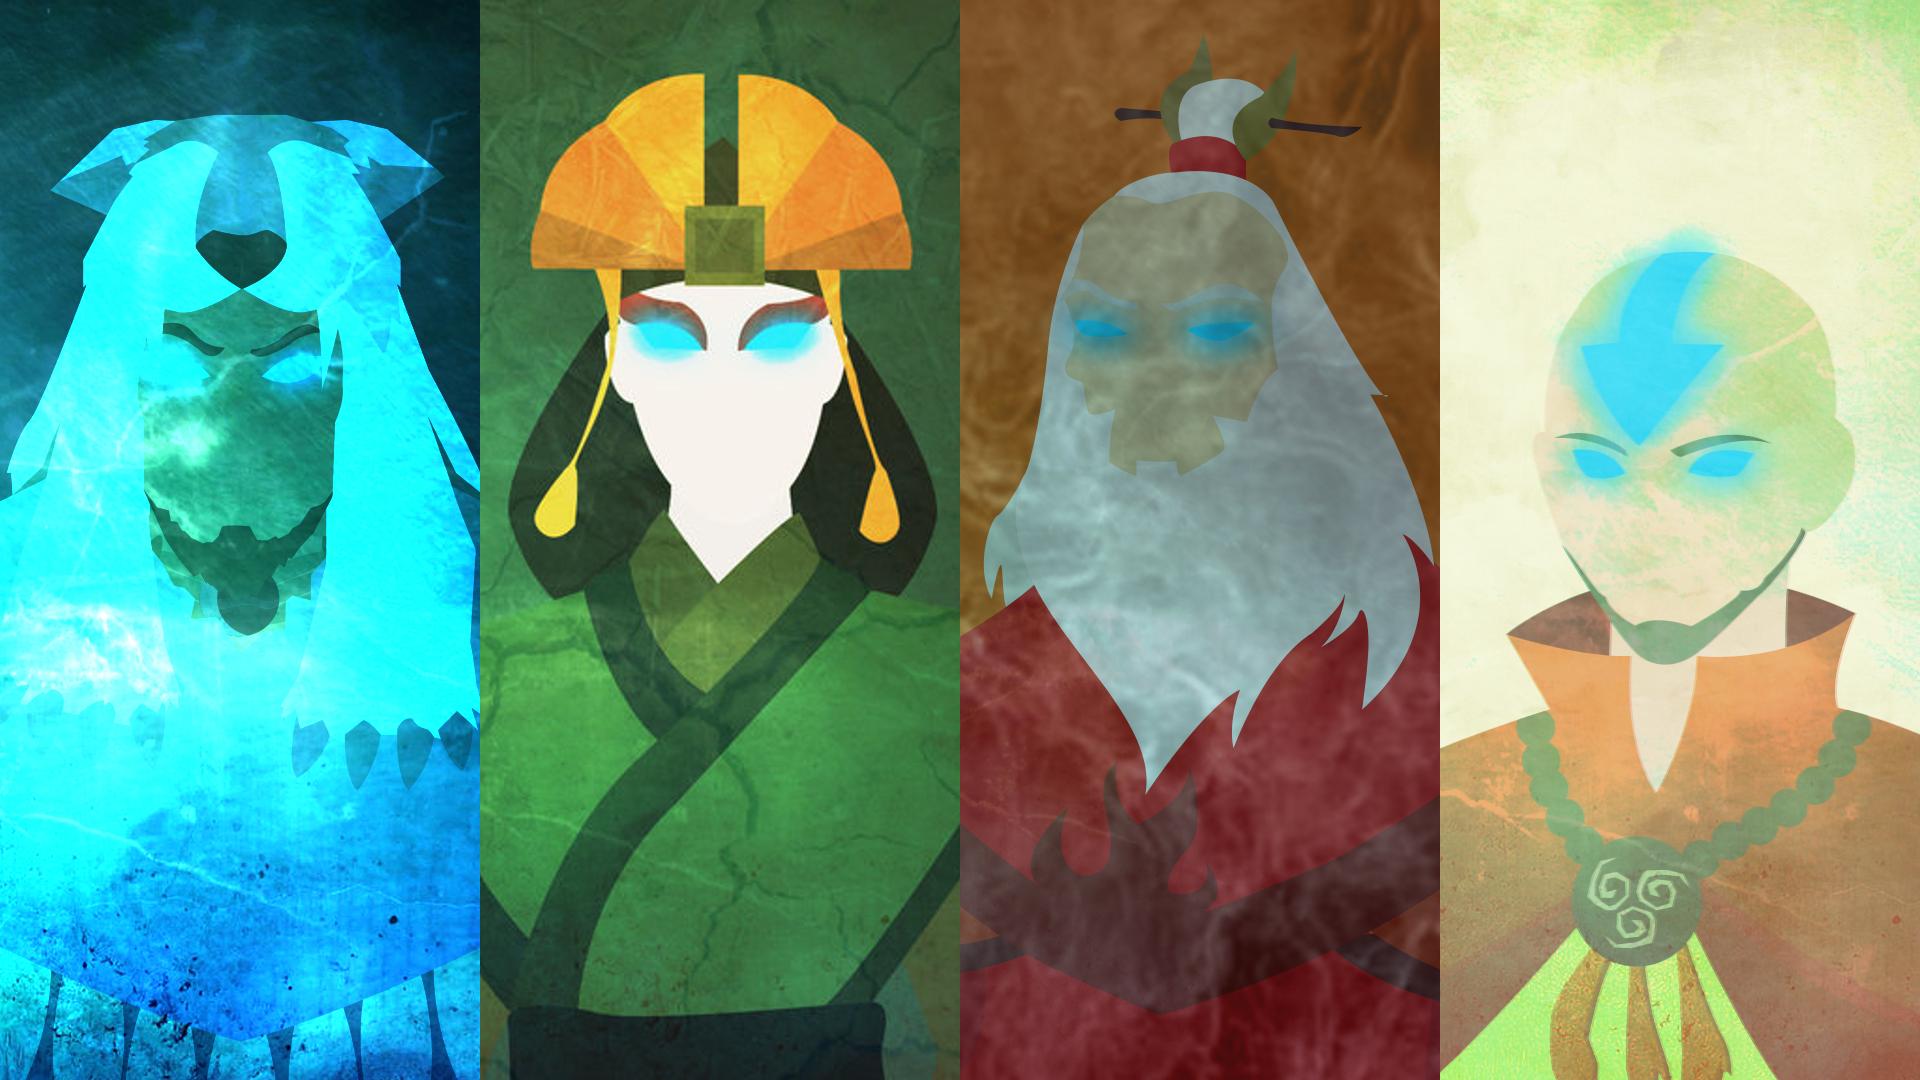 I made four wallpaper with the Avatars from Kuruk to Aang (all 1920x1080)